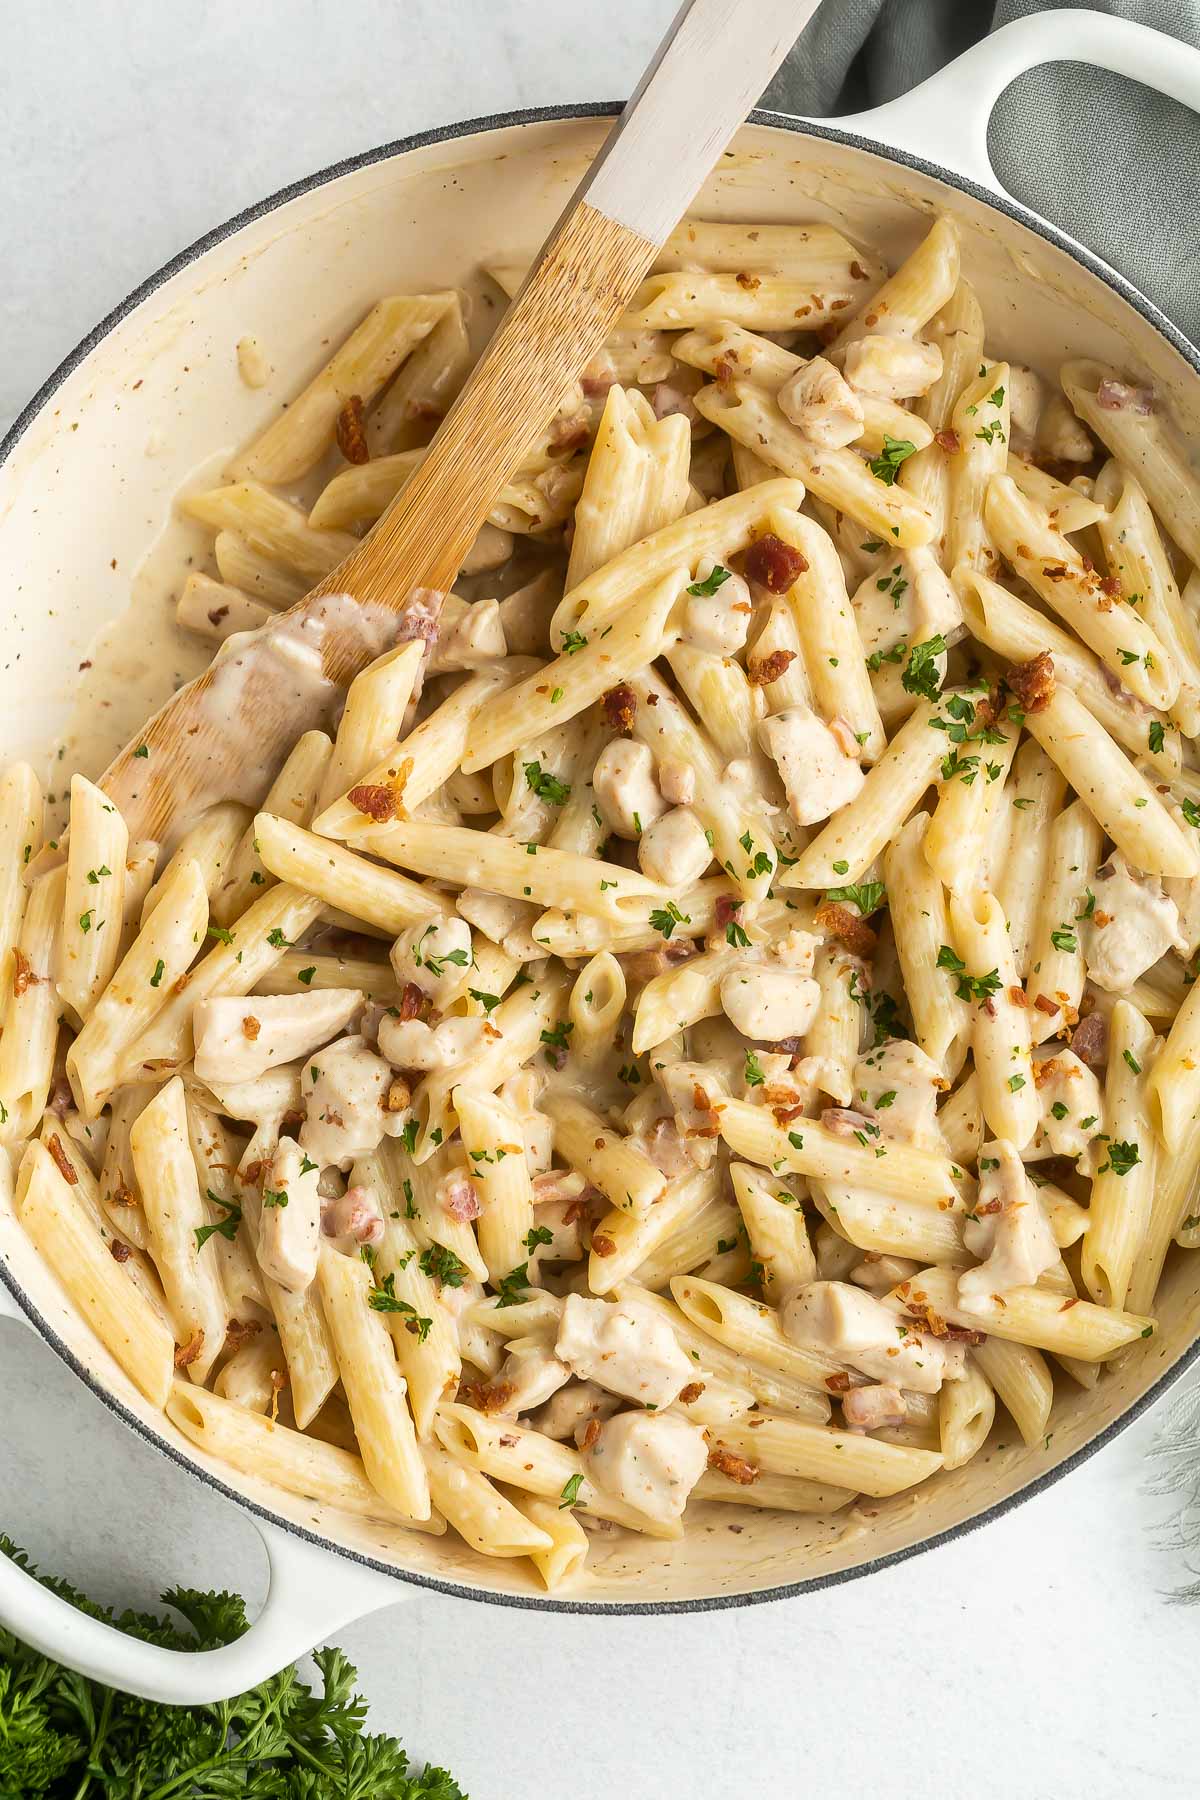 close up image of penne pasta with chicken and bacon in creamy sauce